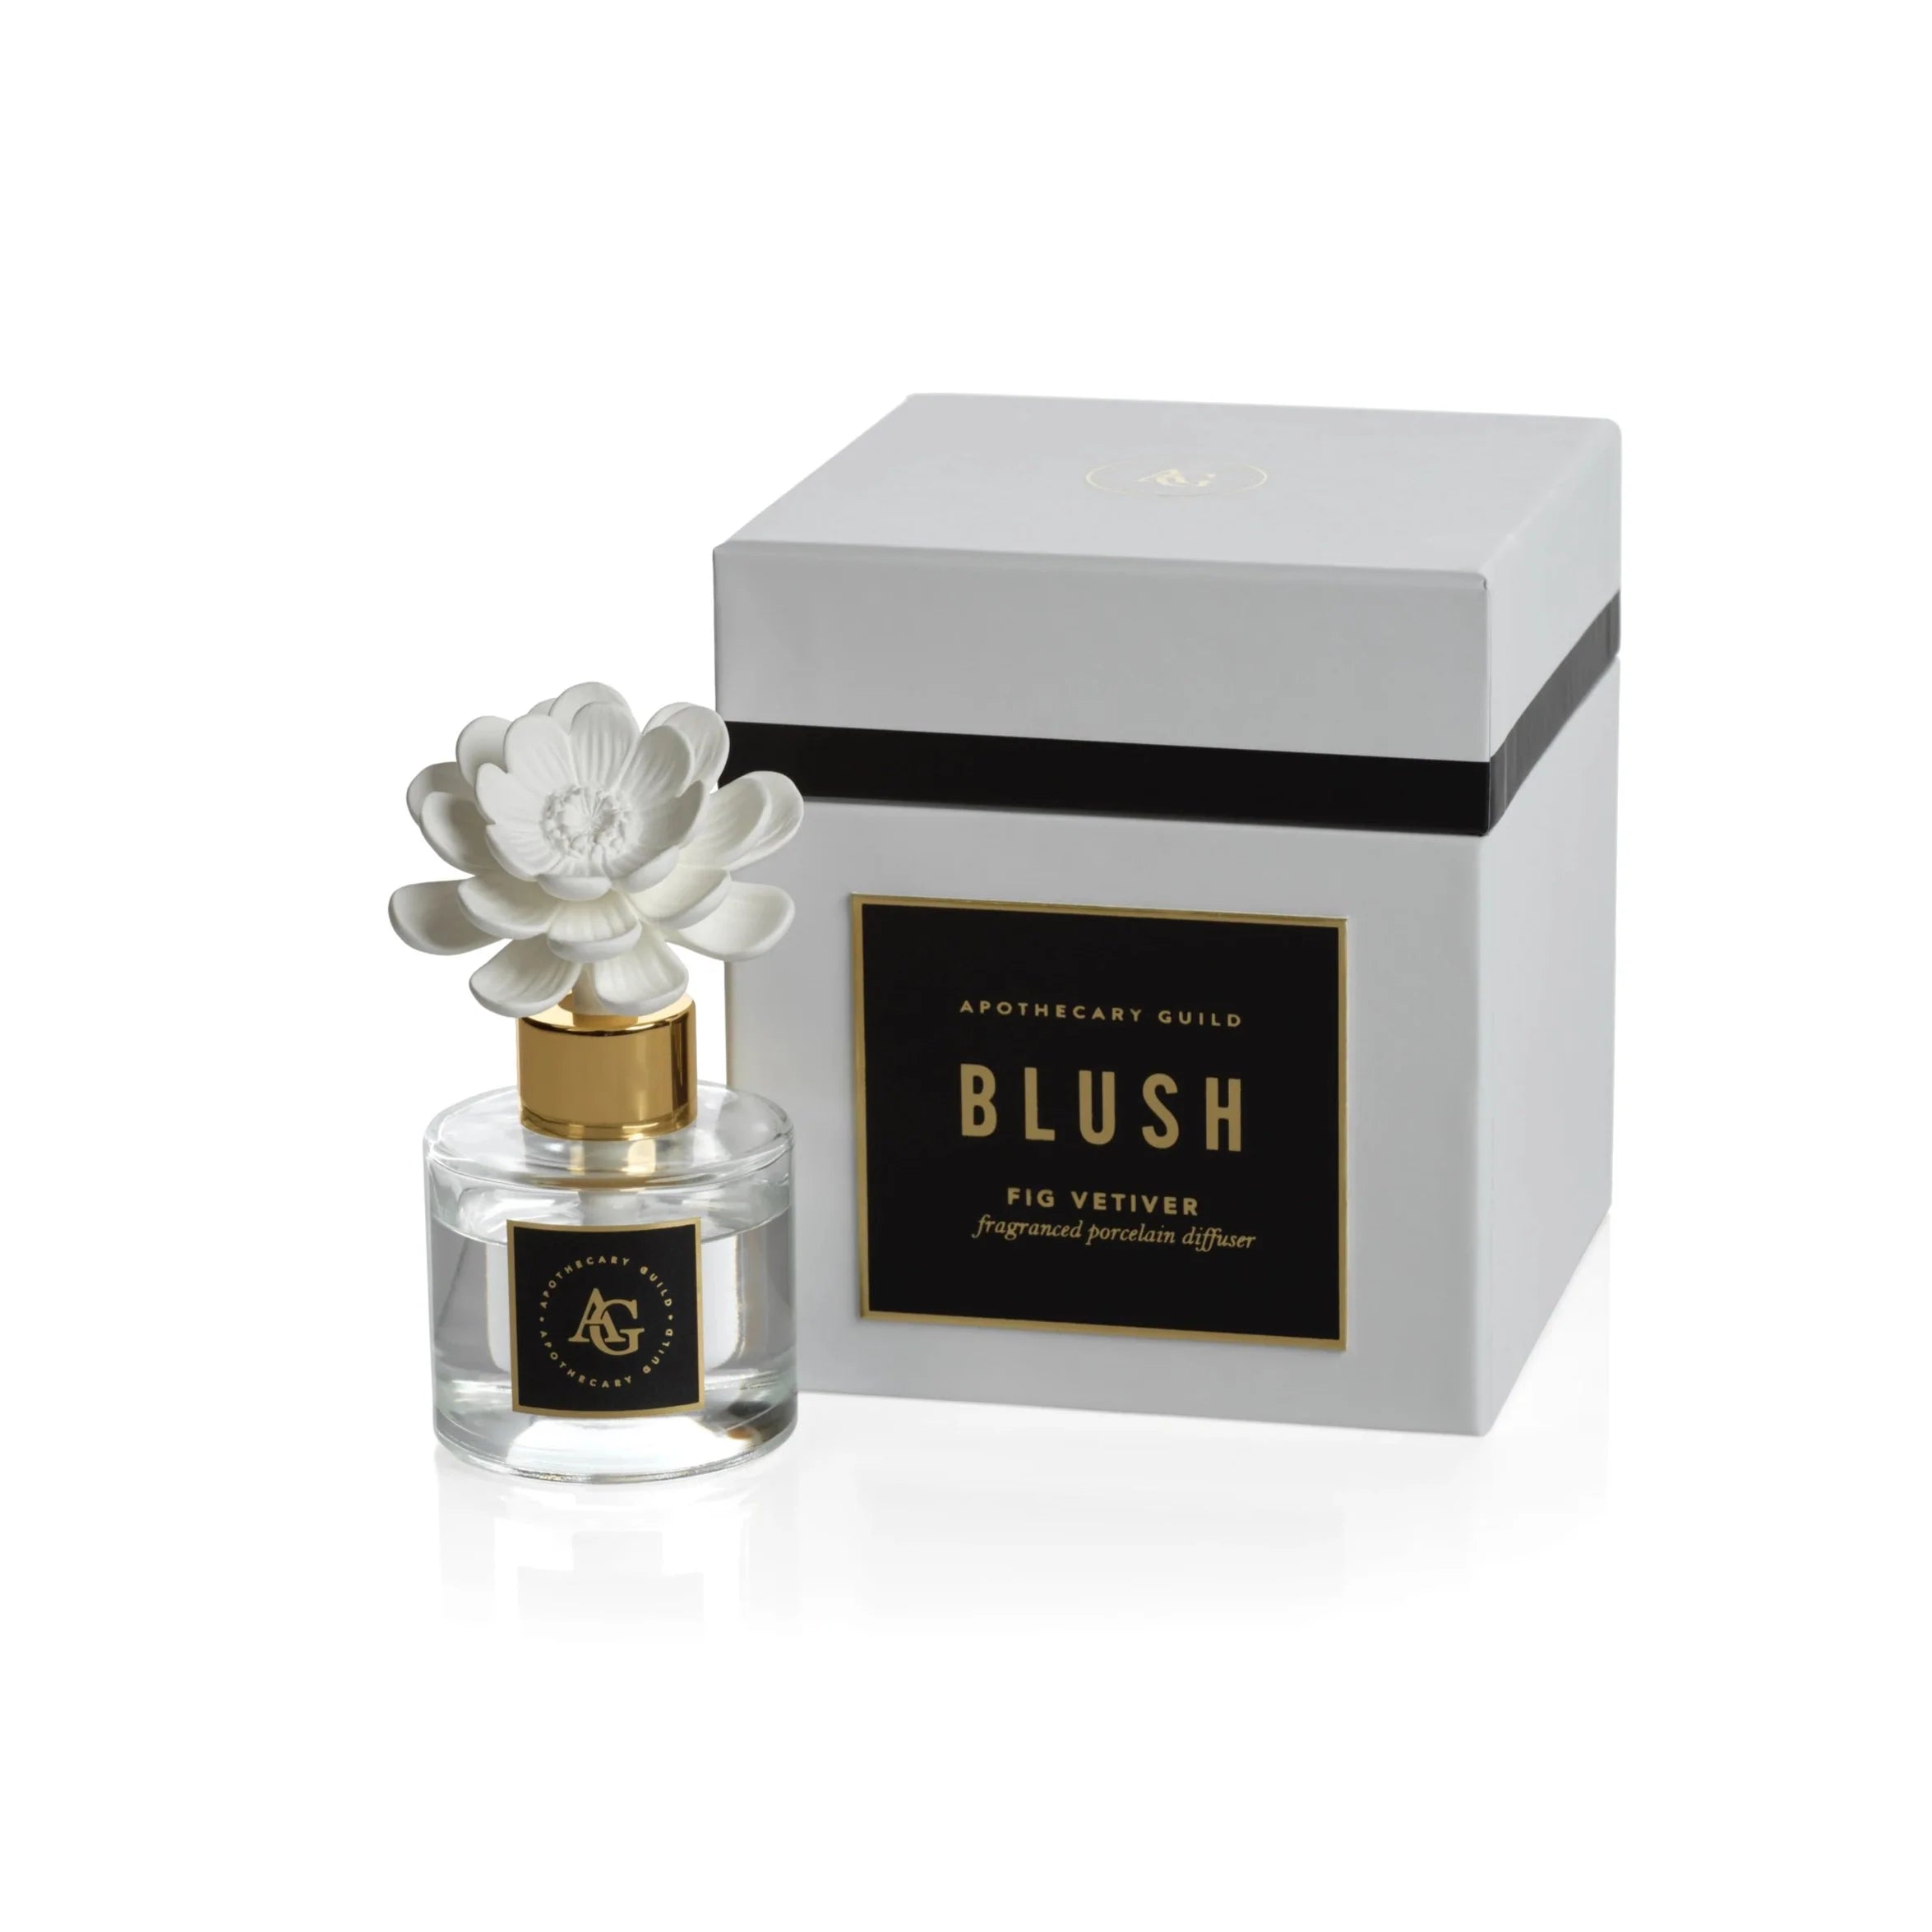 Apothecary Guild Blush Porcelain Diffuser - Fig Vetiver